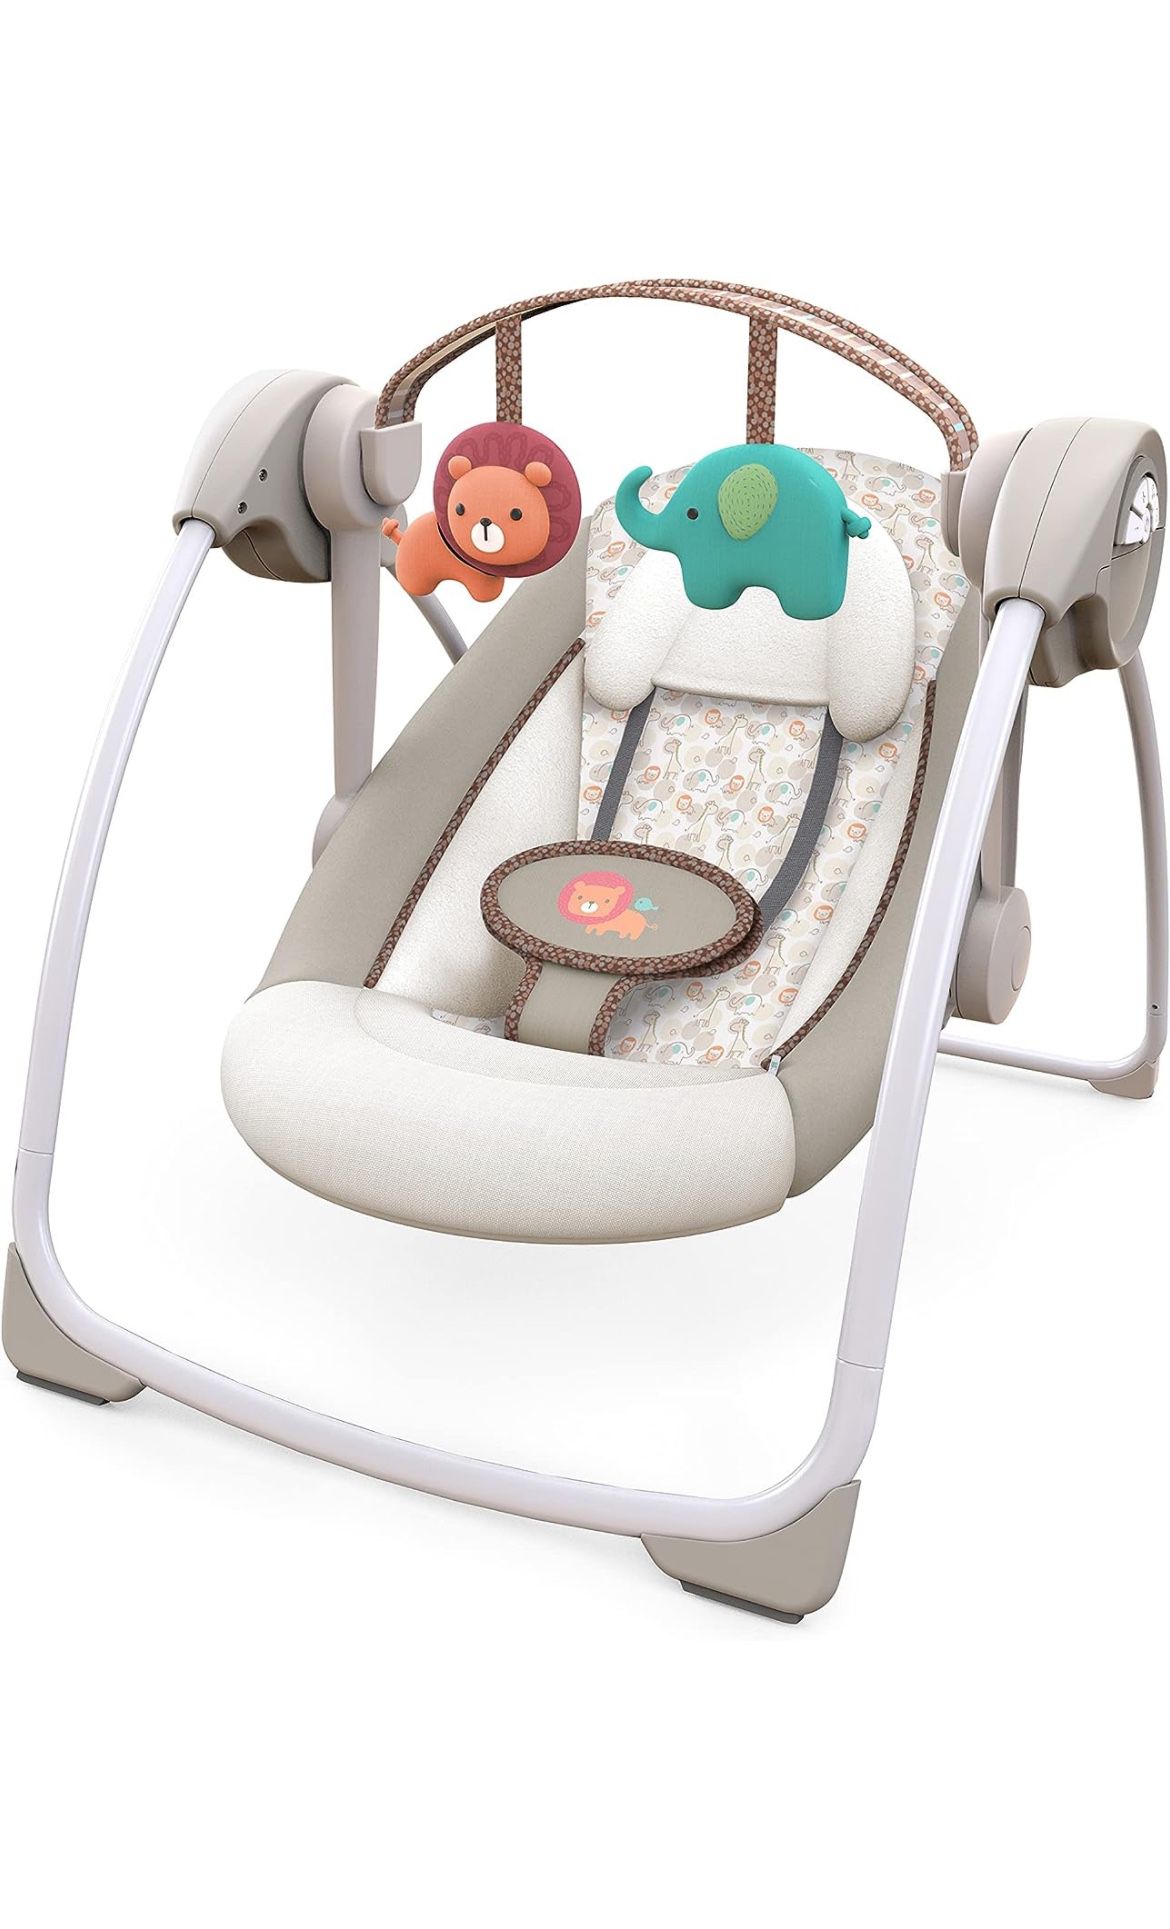 Ingenuity Soothe 'n Delight Compact Portable 6-Speed Plush Baby Swing with Music, Folds Easy, 0-9 Months 6-20 lbs (Cozy Kingdom)